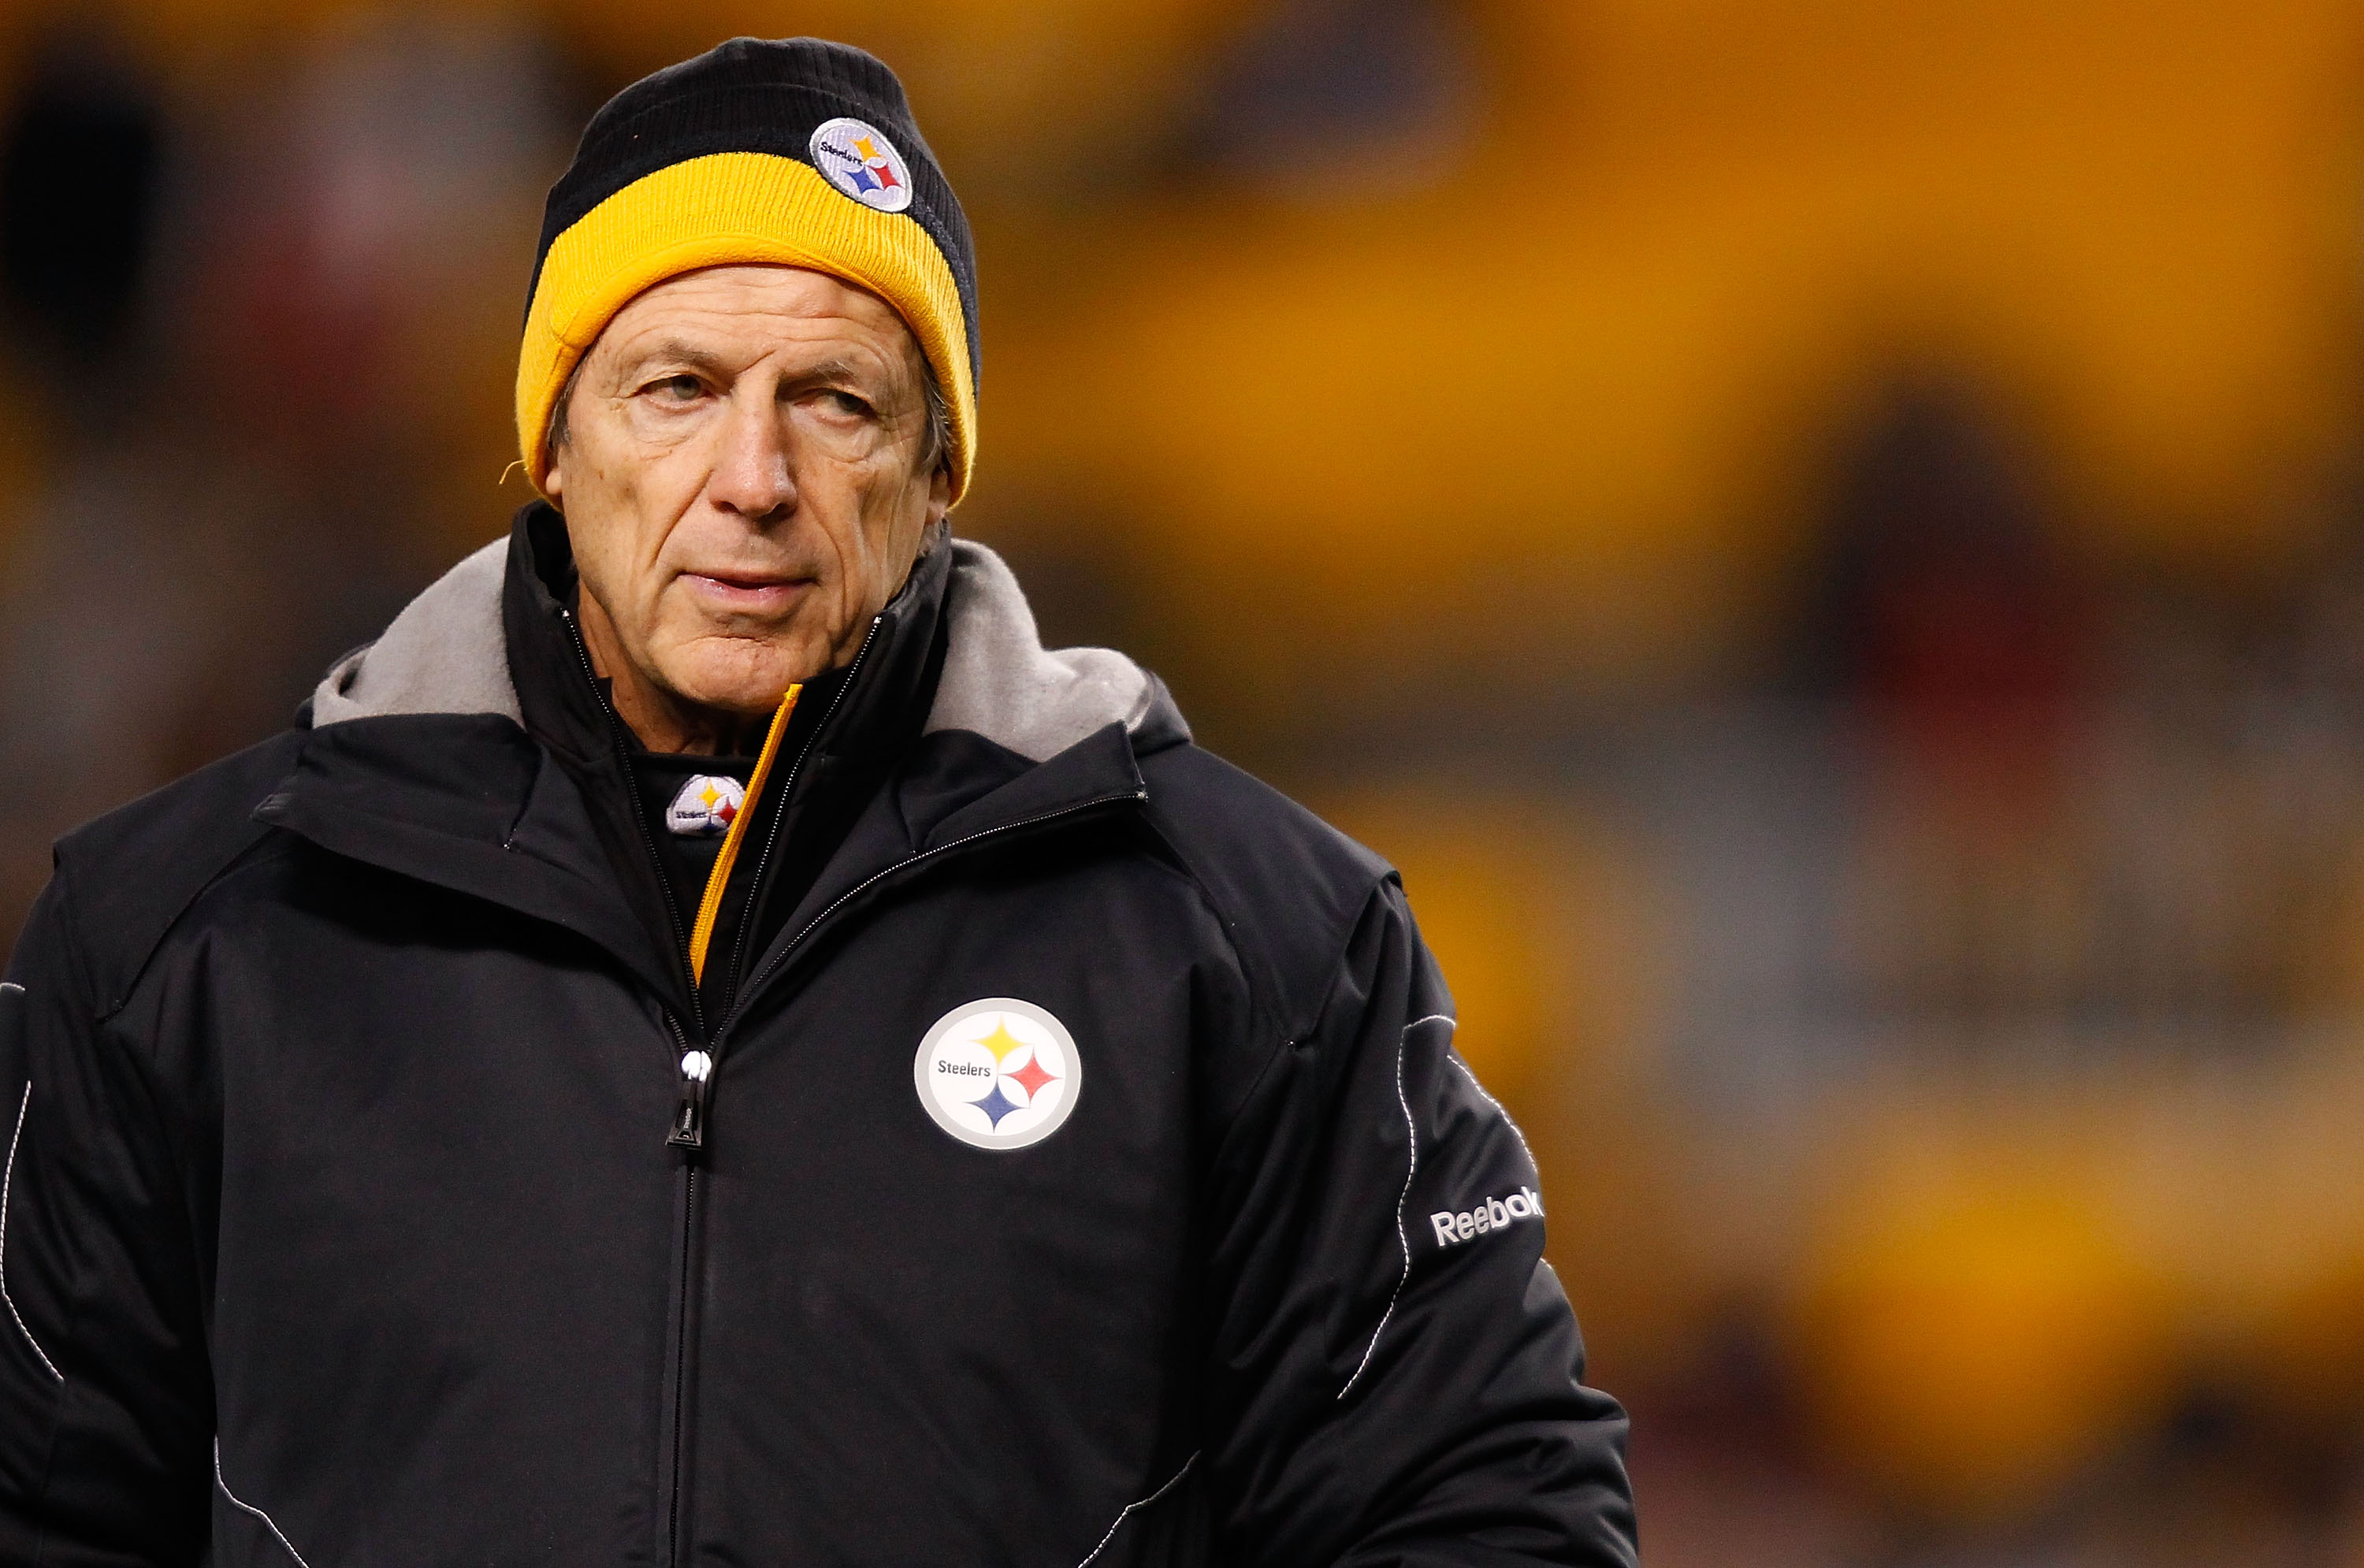 PITTSBURGH - DECEMBER 23:  Defensive coordinator Dick LeBeau of the Pittsburgh Steelers watches his team warm up prior to the game against the Carolina Panthers on December 23, 2010 at Heinz Field in Pittsburgh, Pennsylvania.  (Photo by Jared Wickerham/Ge